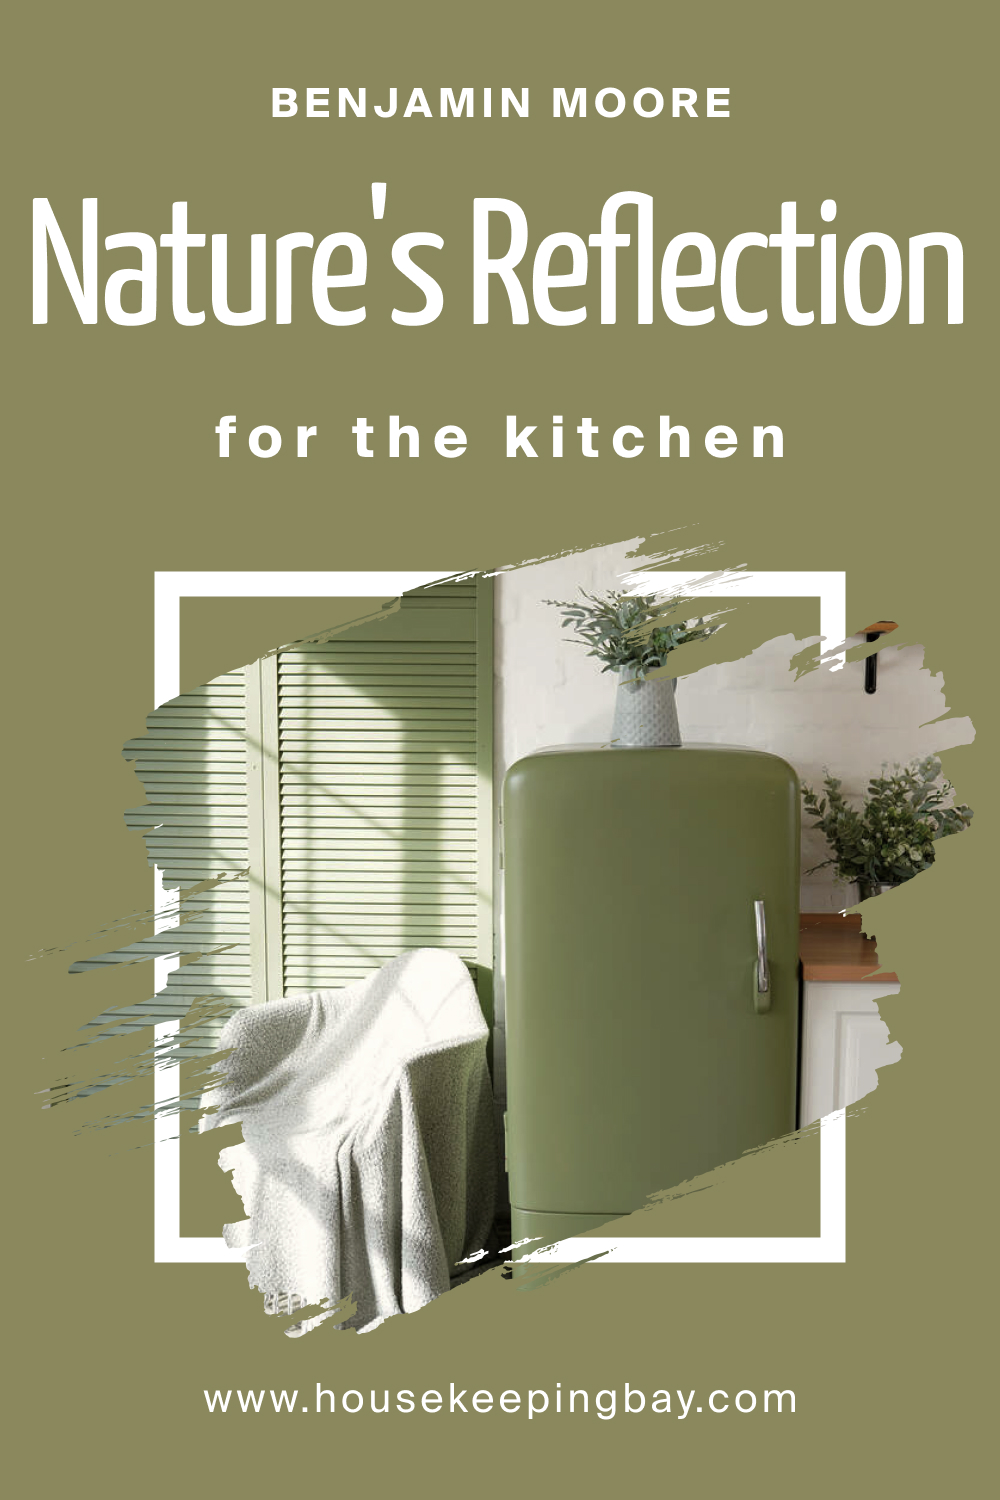 How to Use BM Nature's Reflection 504 in the Kitchen?